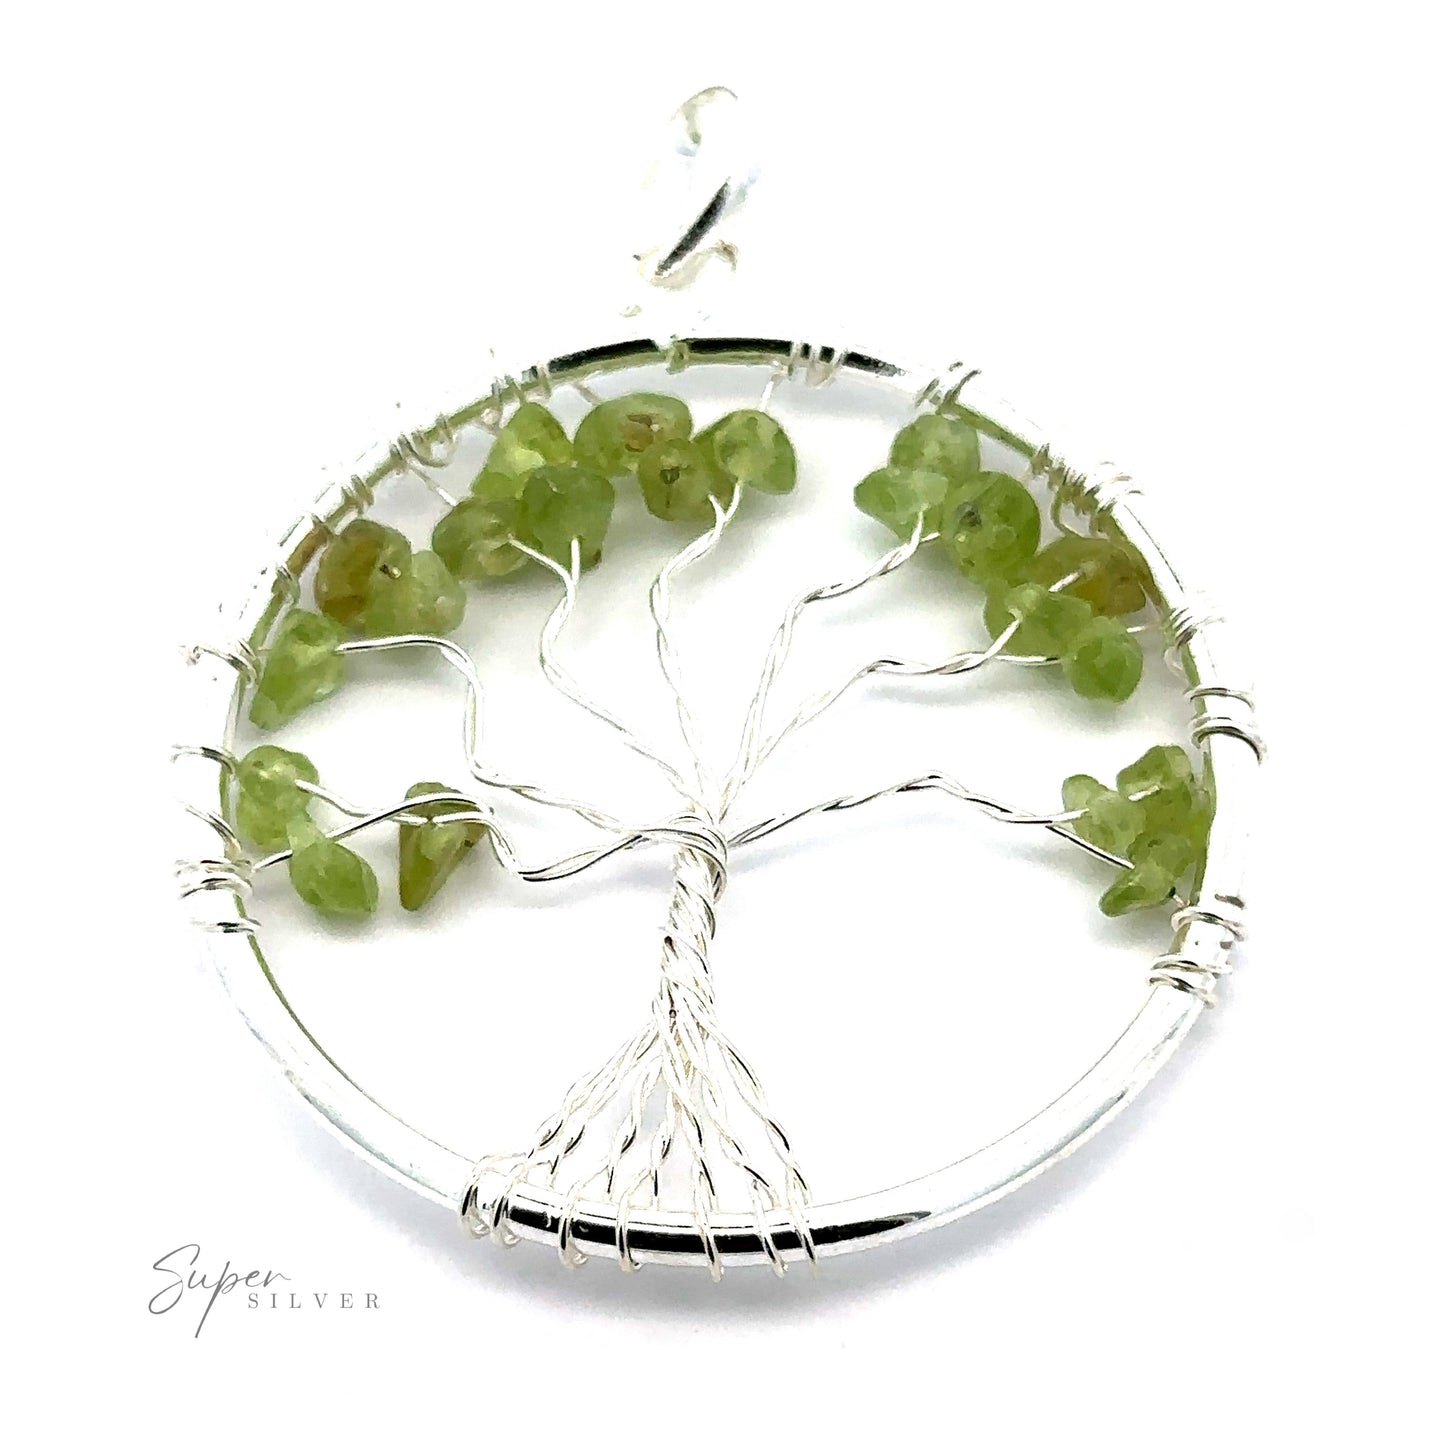 
                  
                    A stunning Wire Wrapped Tree of Life Pendant with Stones features small green gemstones as leaves, all housed in a circular metal frame against a plain white background. "Super Silver" is elegantly inscribed in the bottom left corner.
                  
                